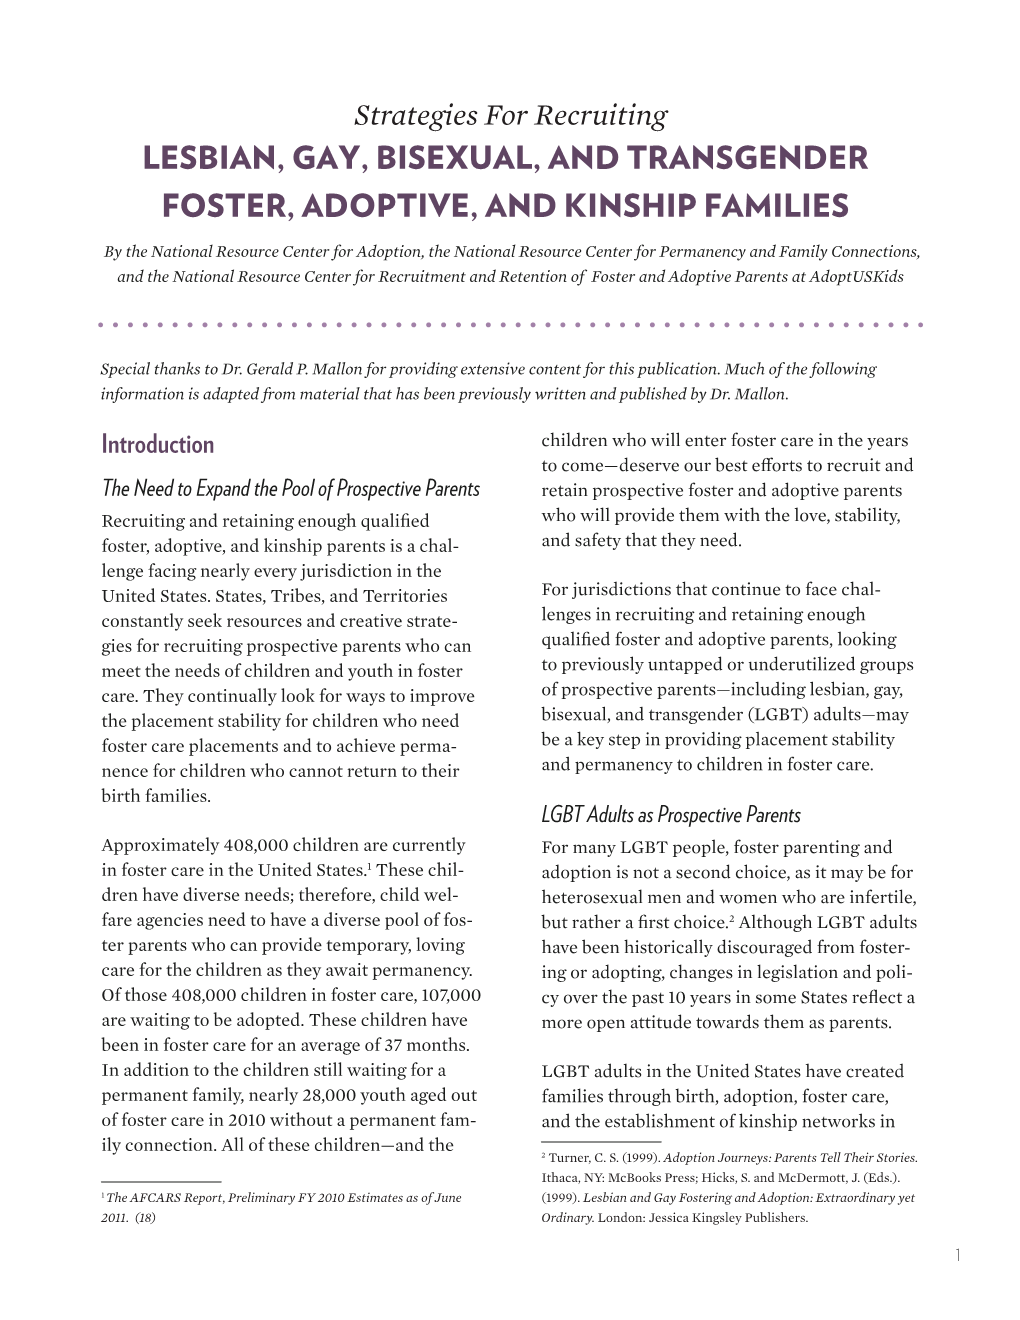 Strategies for Recruiting LESBIAN, GAY, BISEXUAL, and TRANSGENDER FOSTER, ADOPTIVE, and KINSHIP FAMILIES